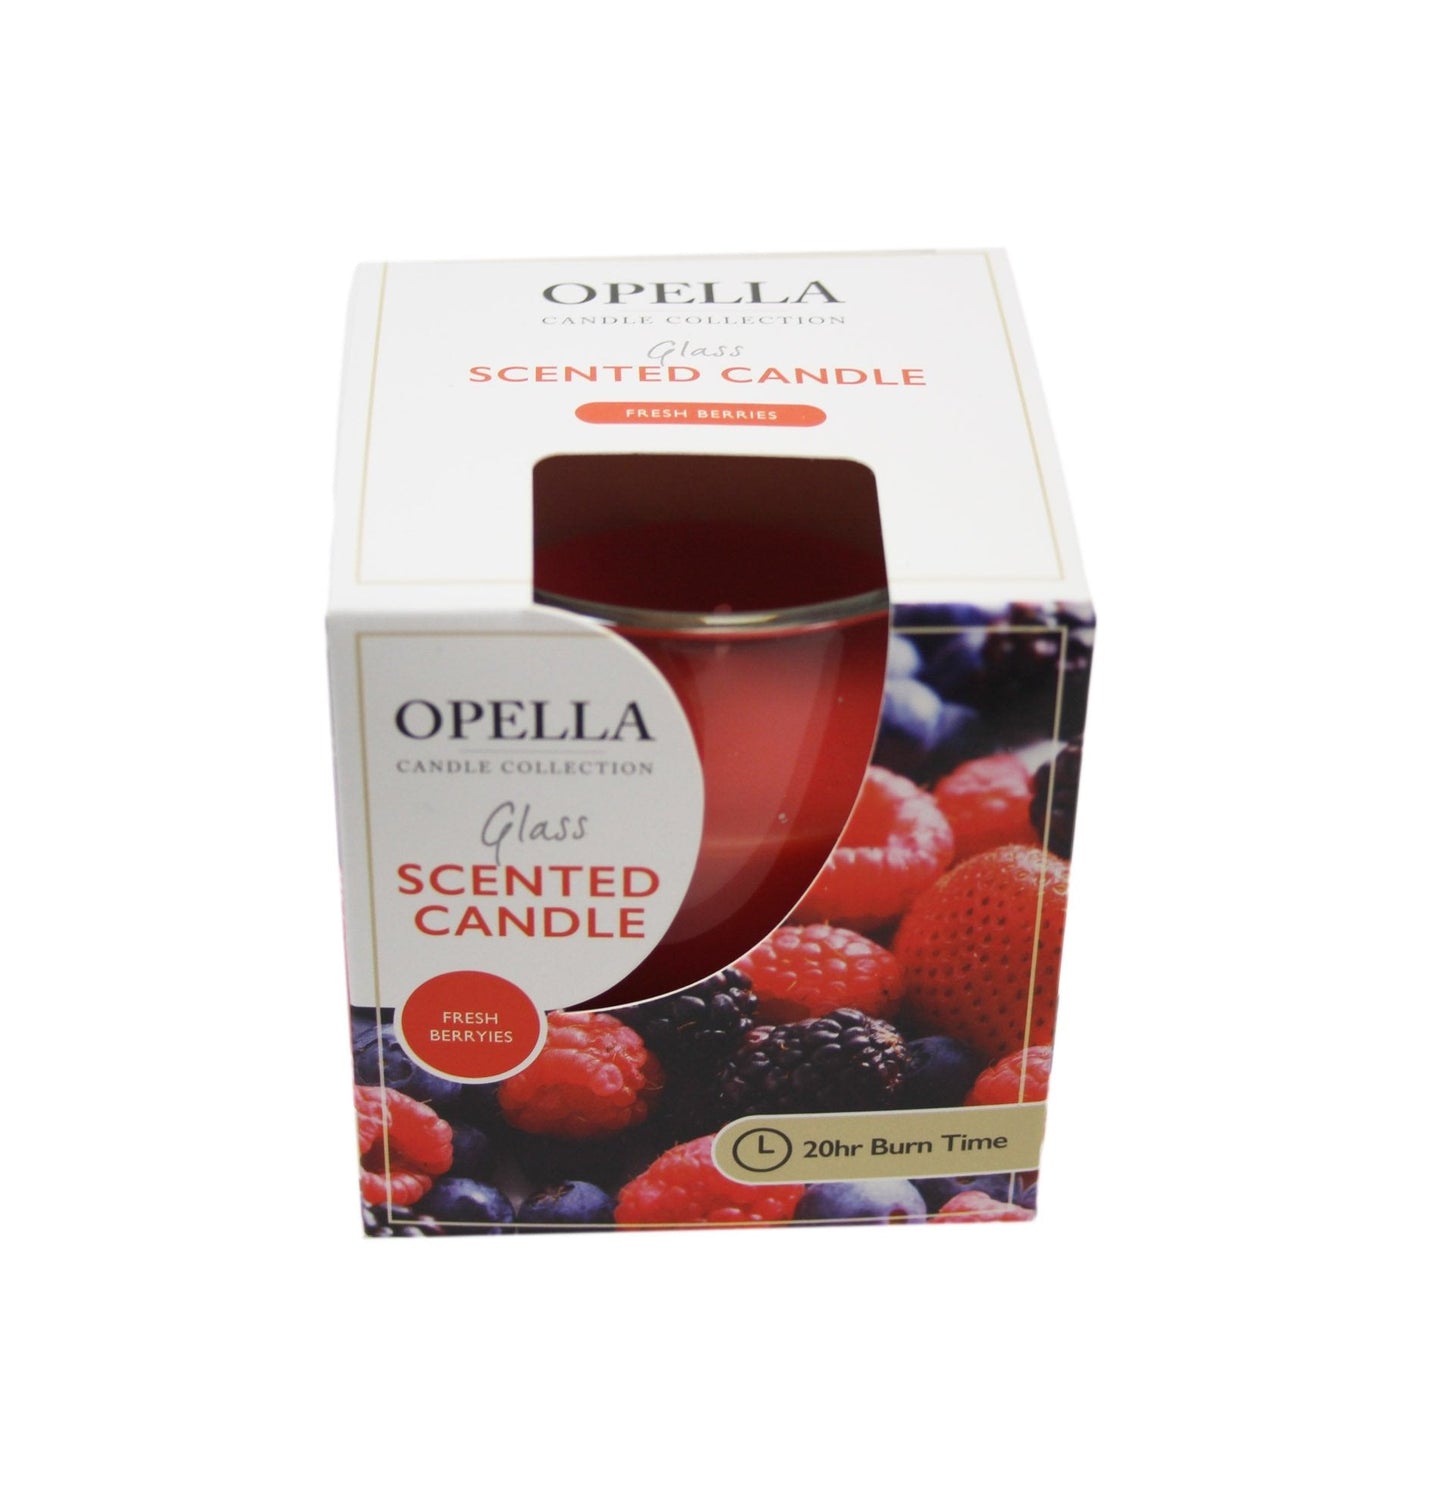 Opella Scented Candle In Glass Jar Fresh Berries Fragrance 5 x 6.5 cm CDJARB (Parcel Rate)